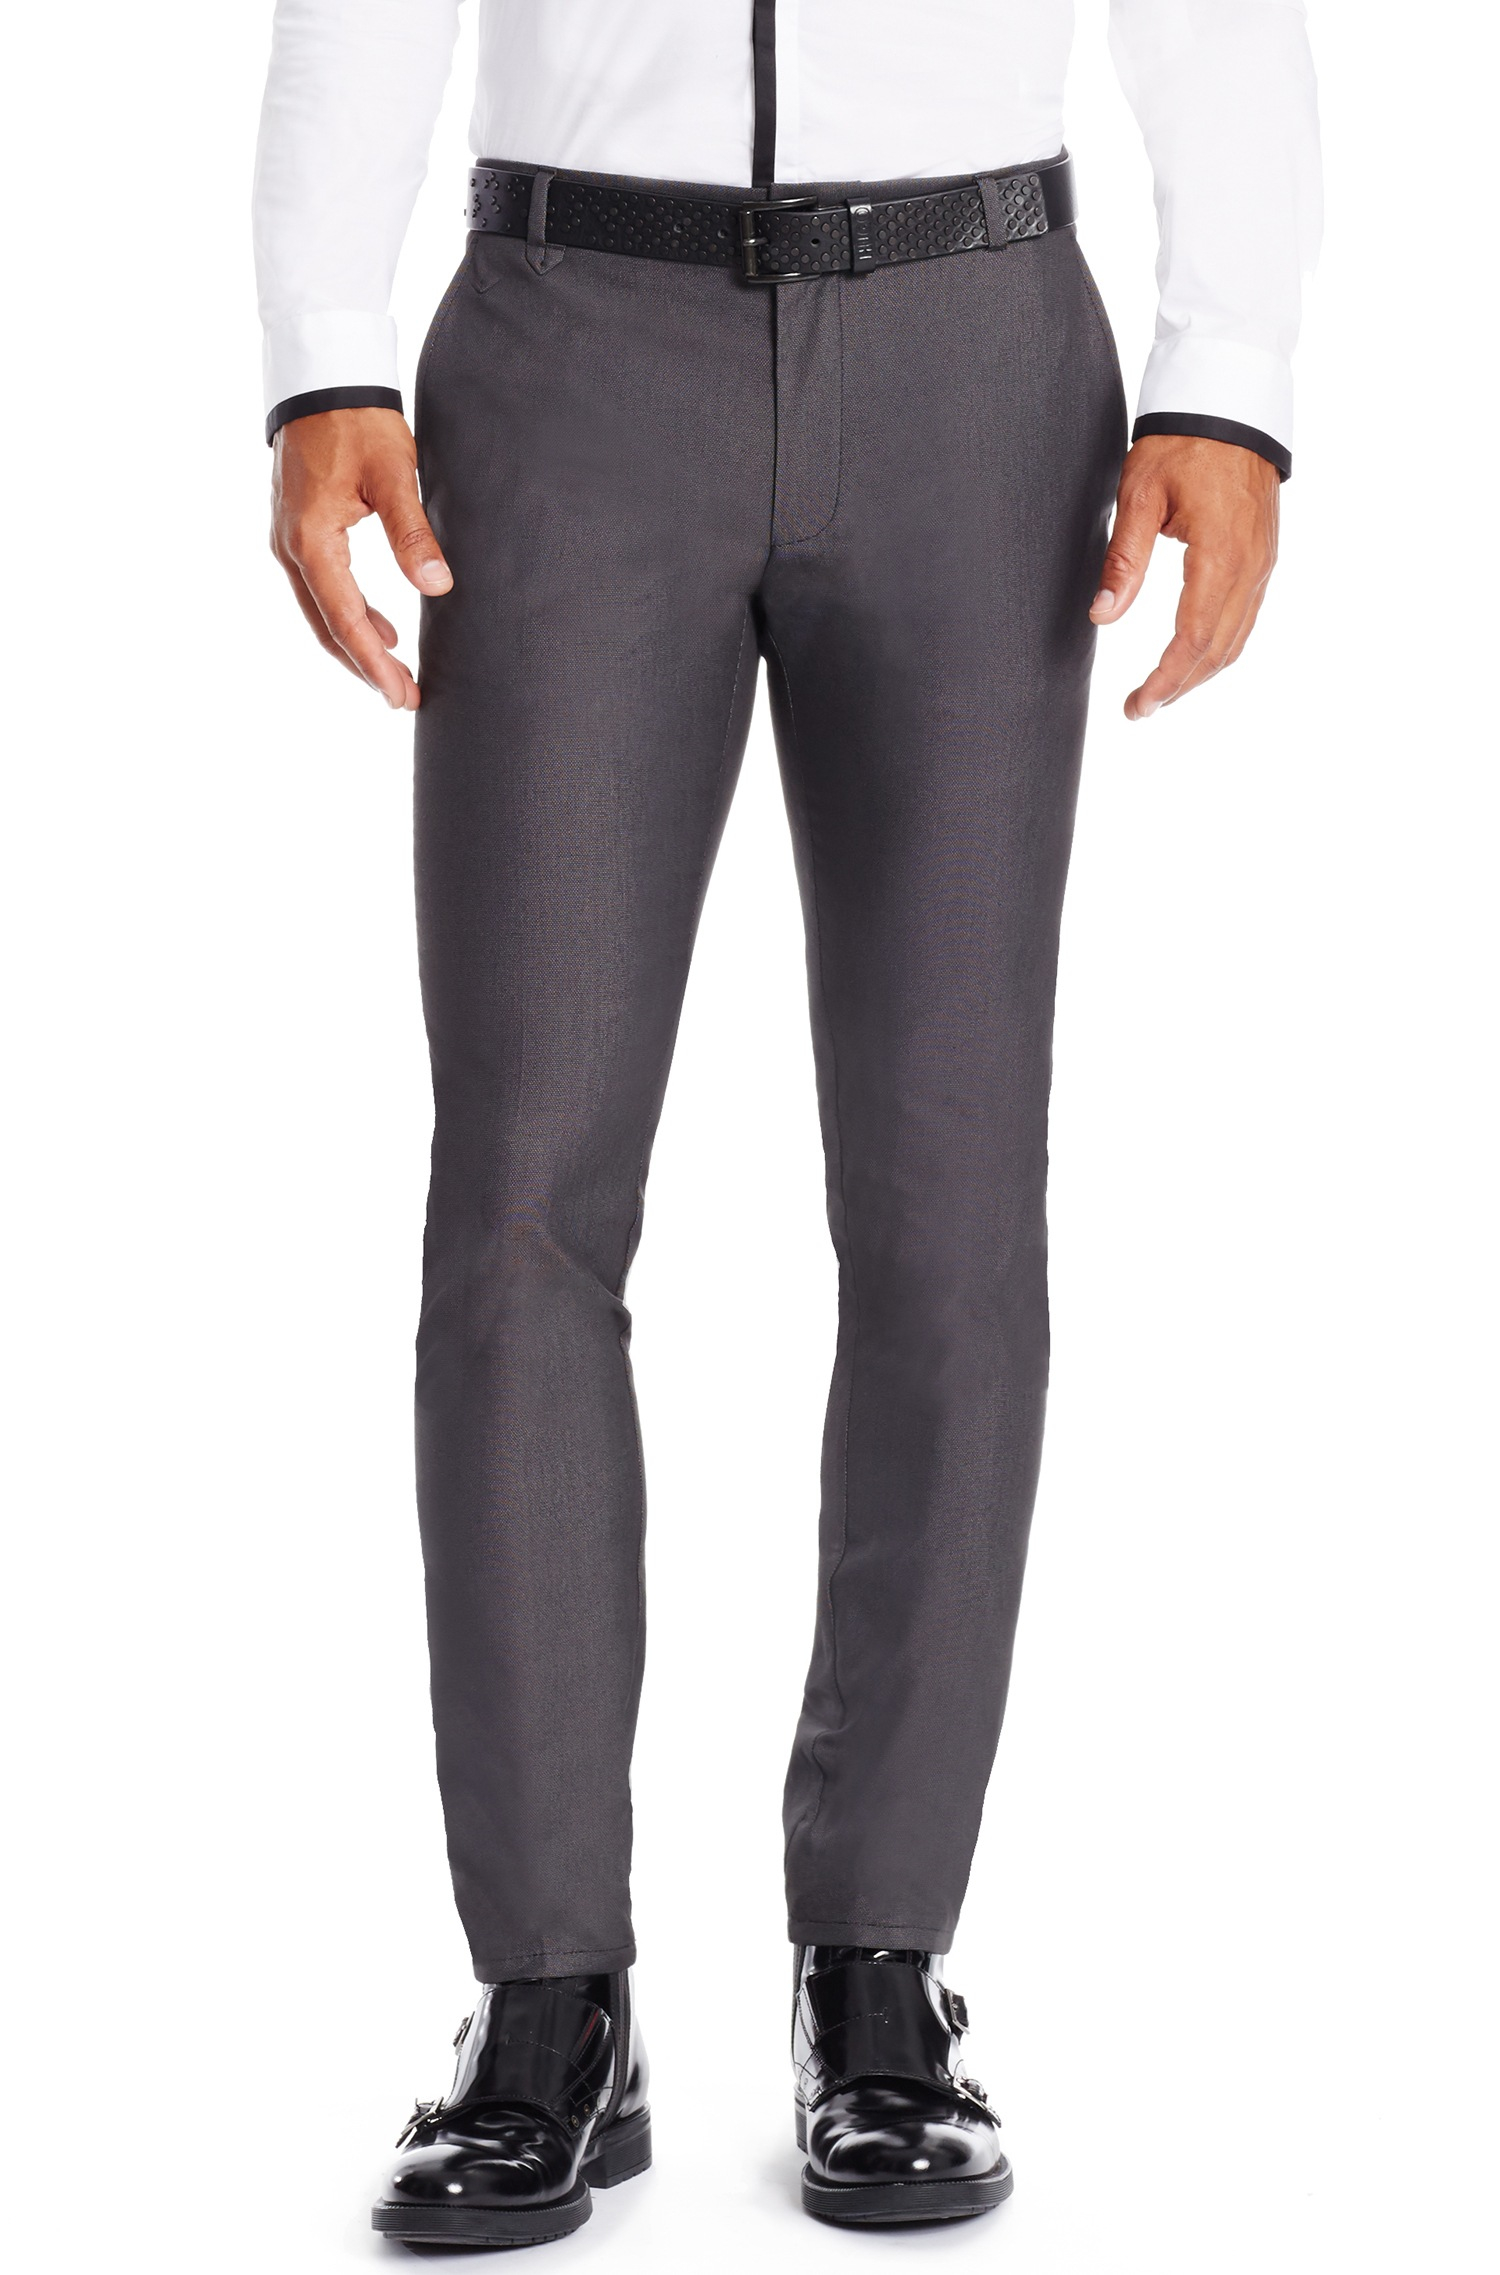 Lyst - Hugo 'heldor' | Extra Slim Fit, Stretch Cotton Dress Pants in ...